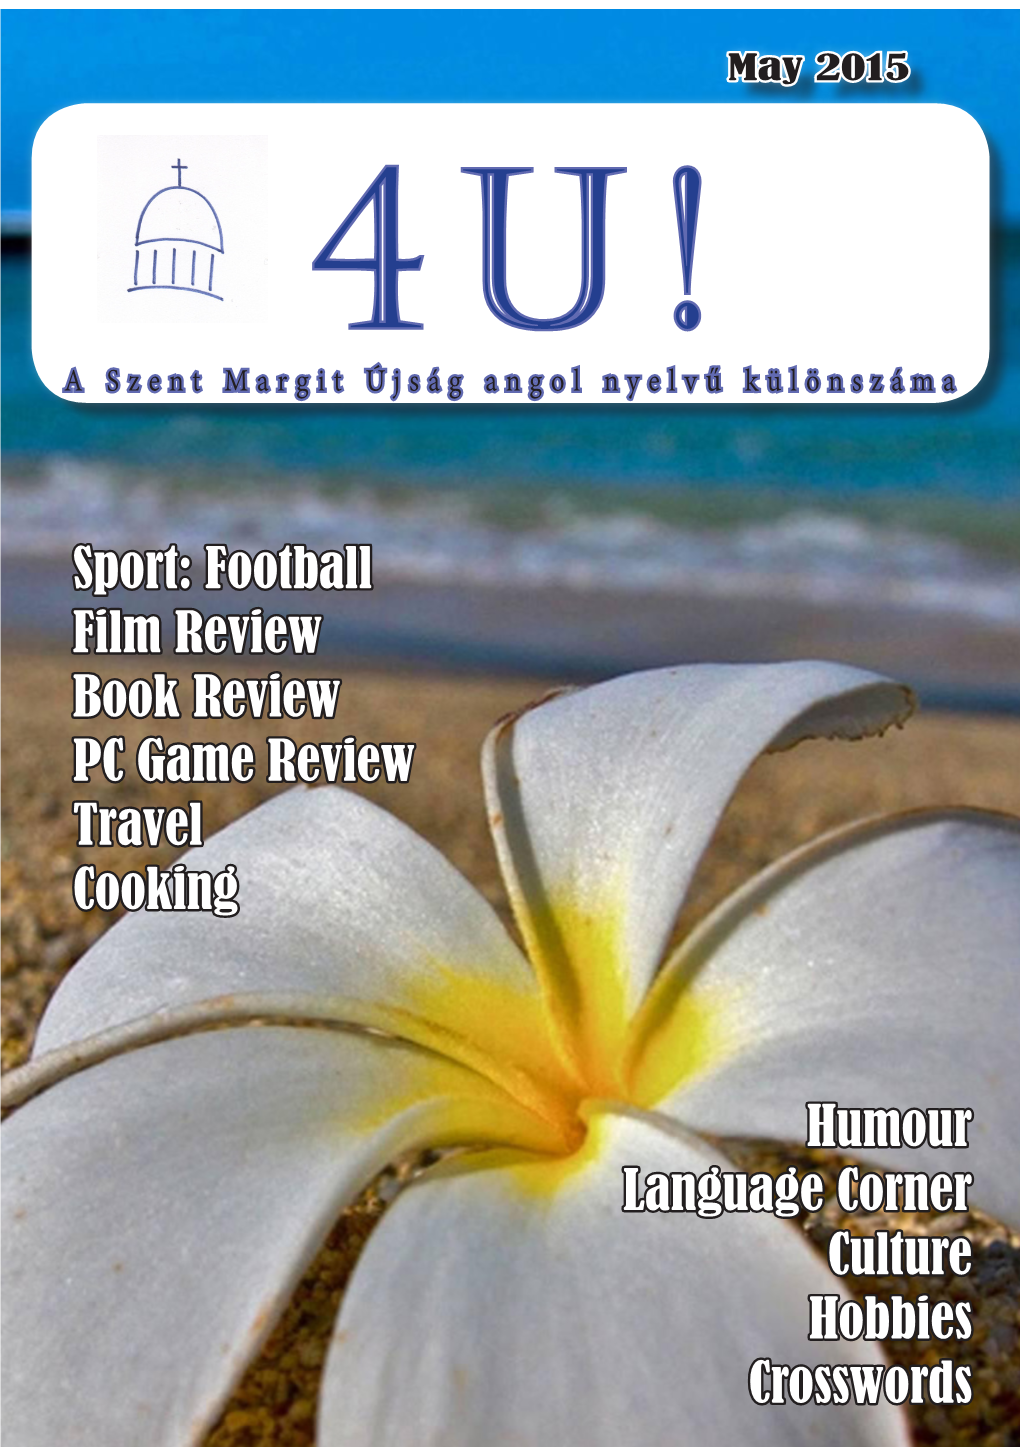 Football Film Review Book Review PC Game Review Travel Cooking